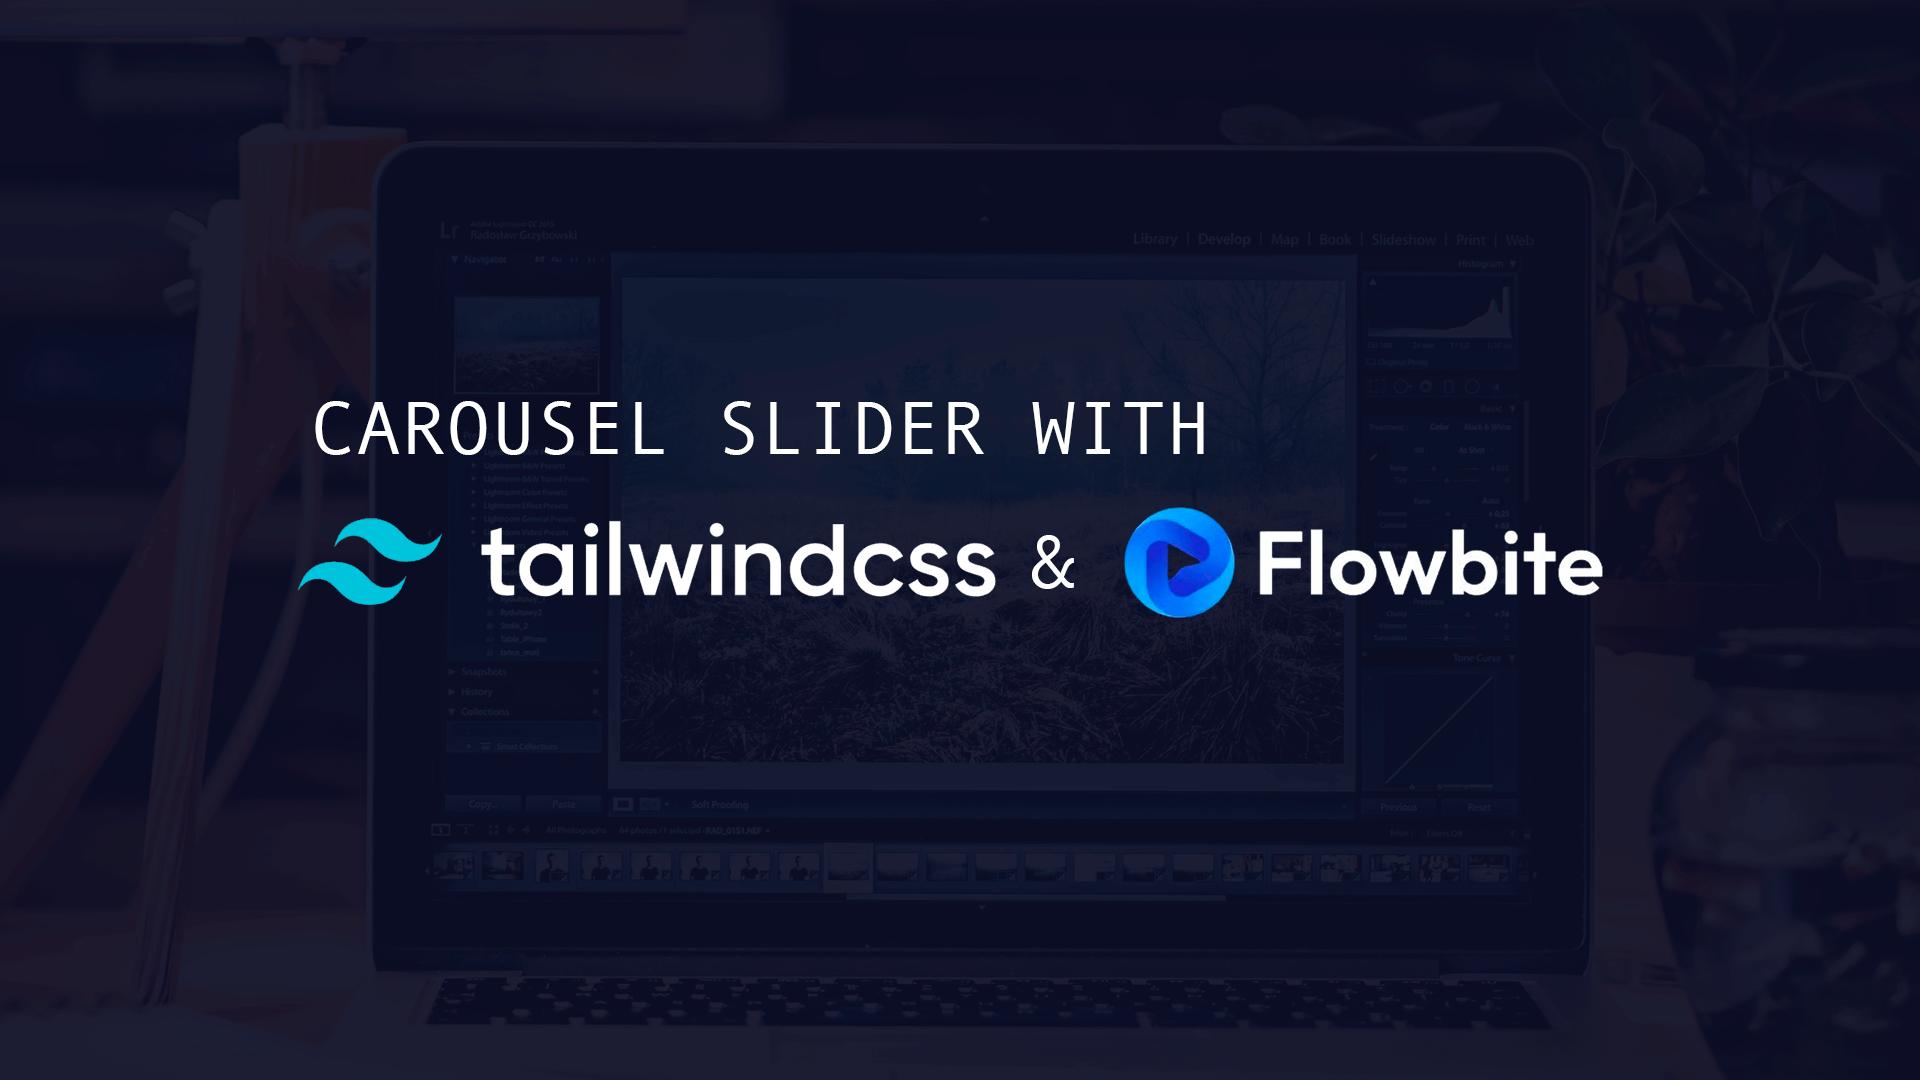 How to use a carousel slider with Tailwind CSS and Flowbite